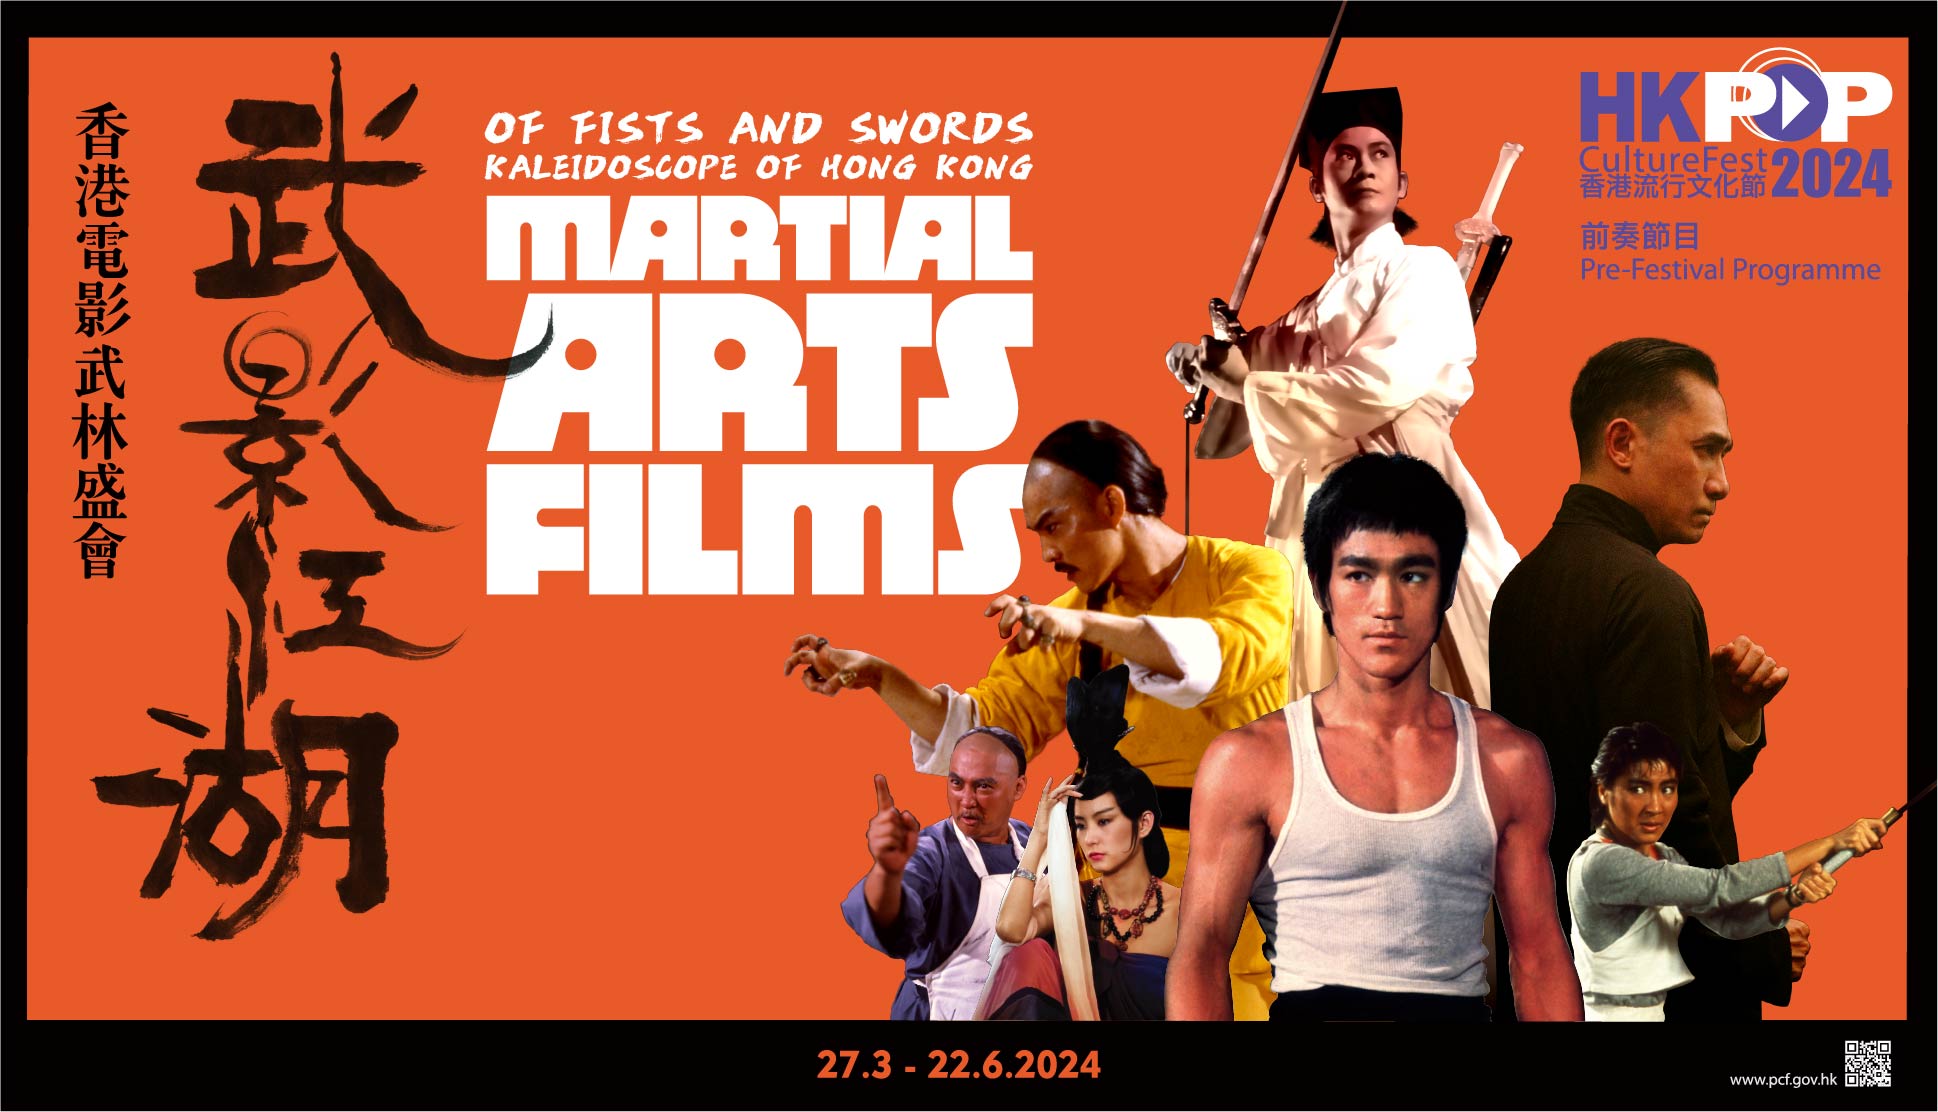 Of Fists and Swords – Kaleidoscope of Hong Kong Martial Arts Films (27/3/2024-22/6/2024)